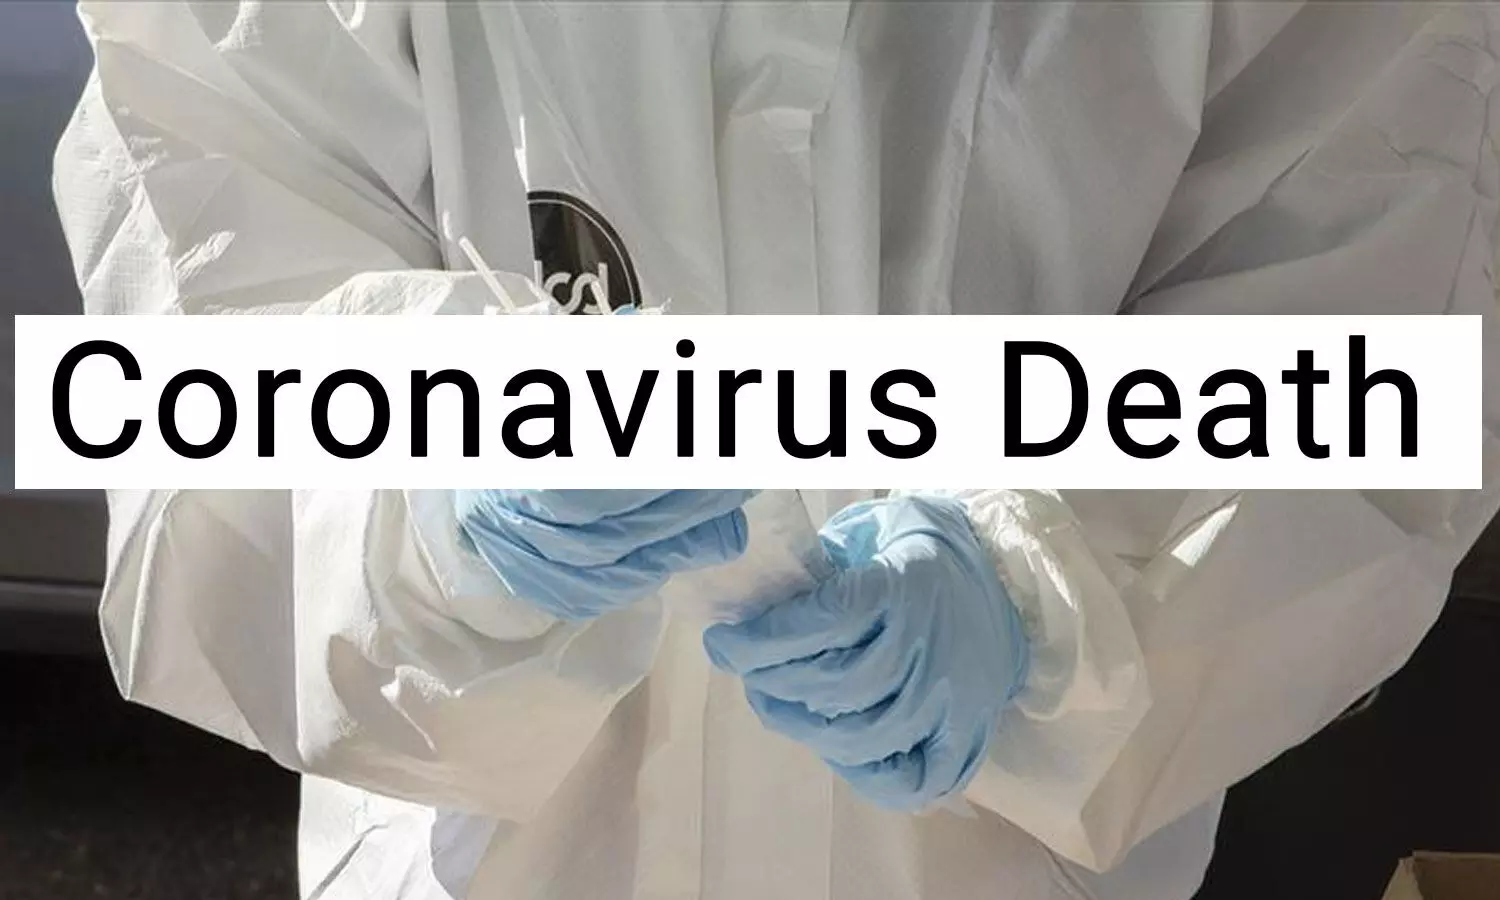 Pakistan reports its first medical casualty to coronavirus in 26-year-old doctor